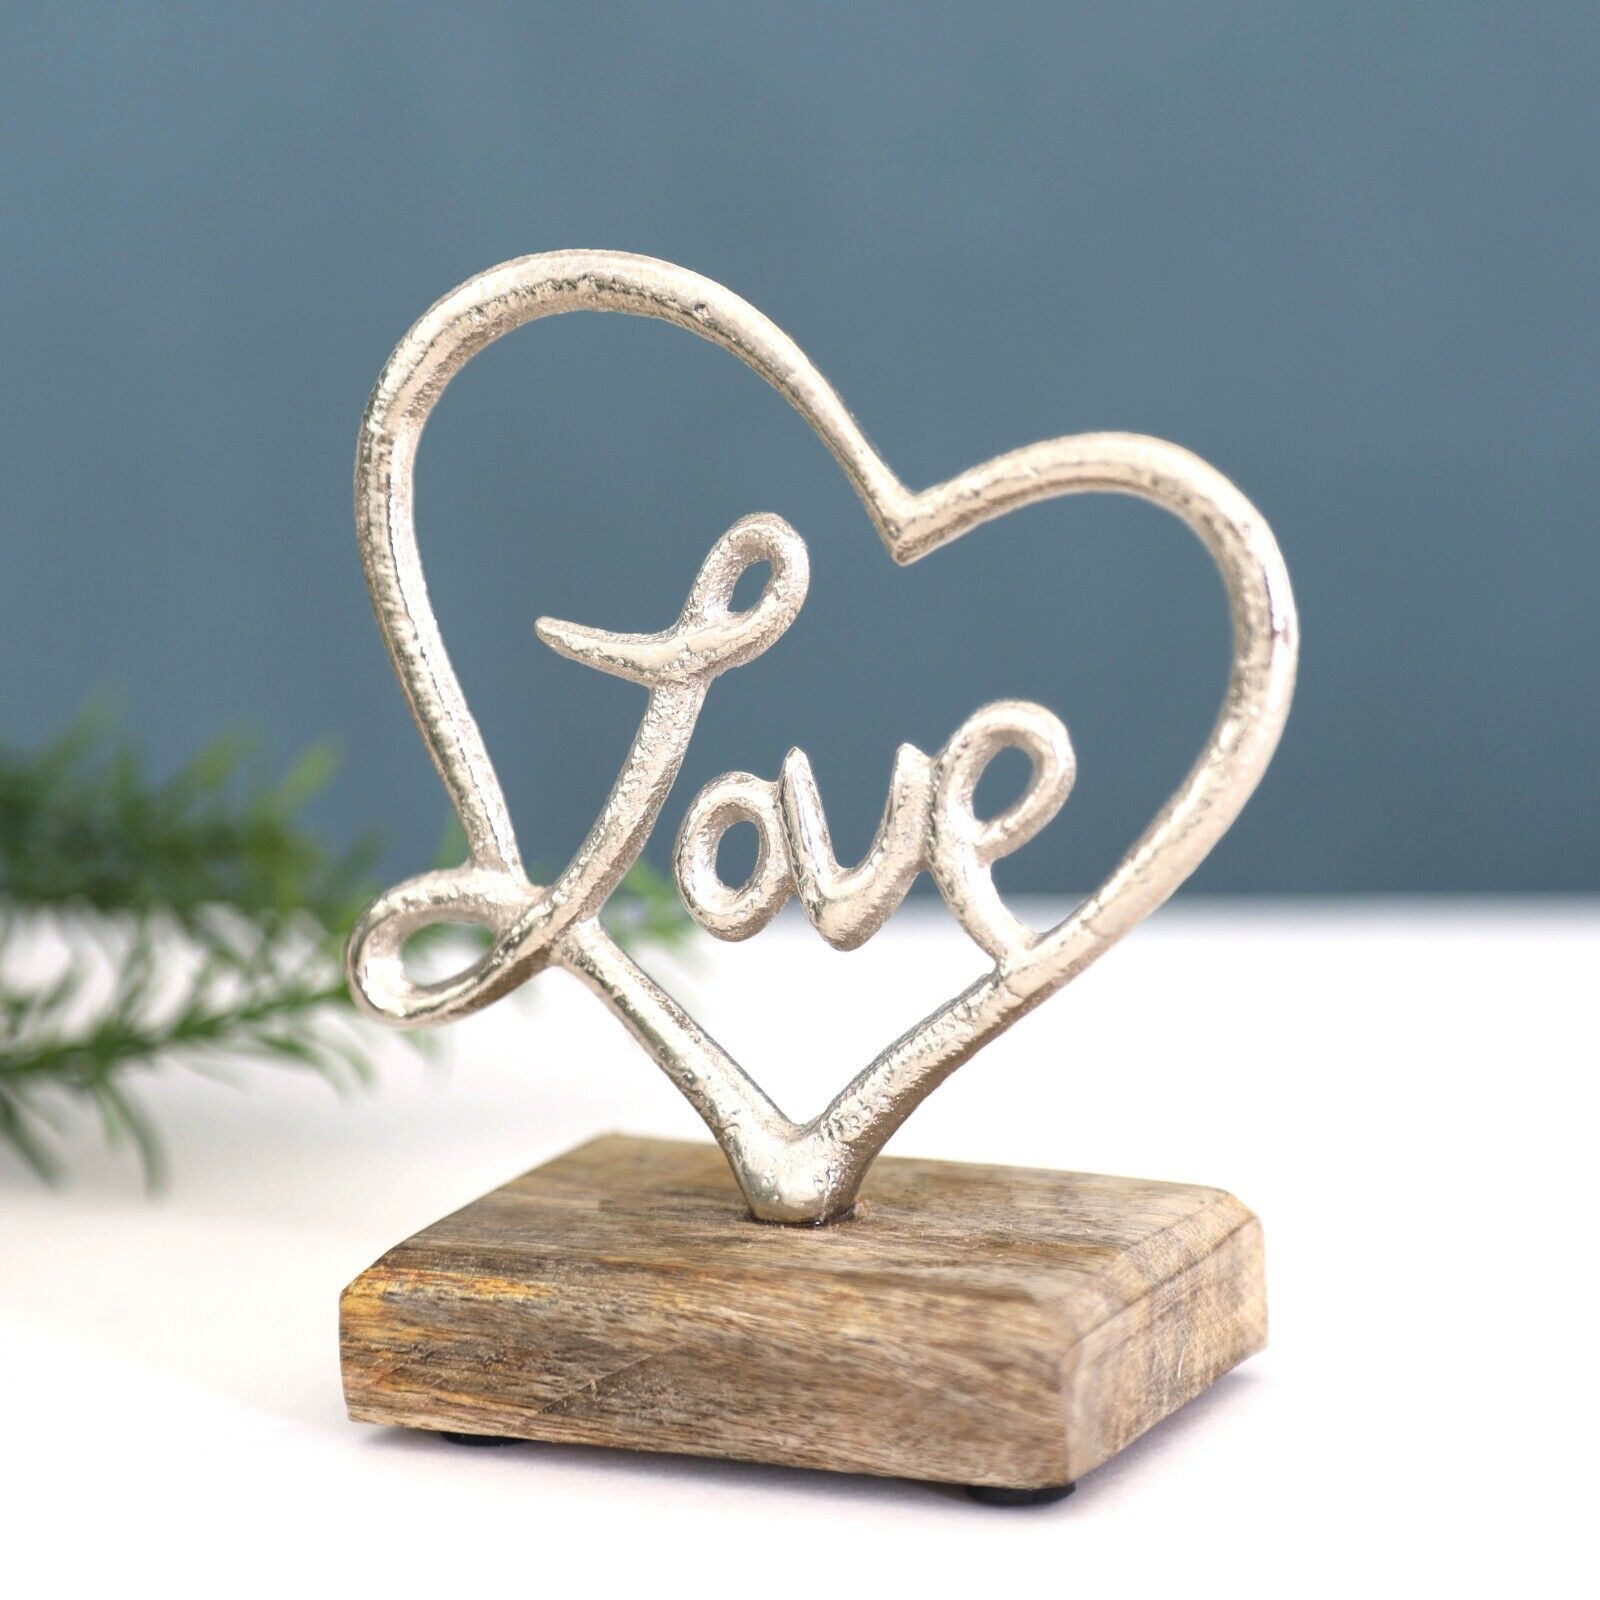 11.5cm Silver Heart with Love on Wooden Plinth Home Decor Ornament Figurine